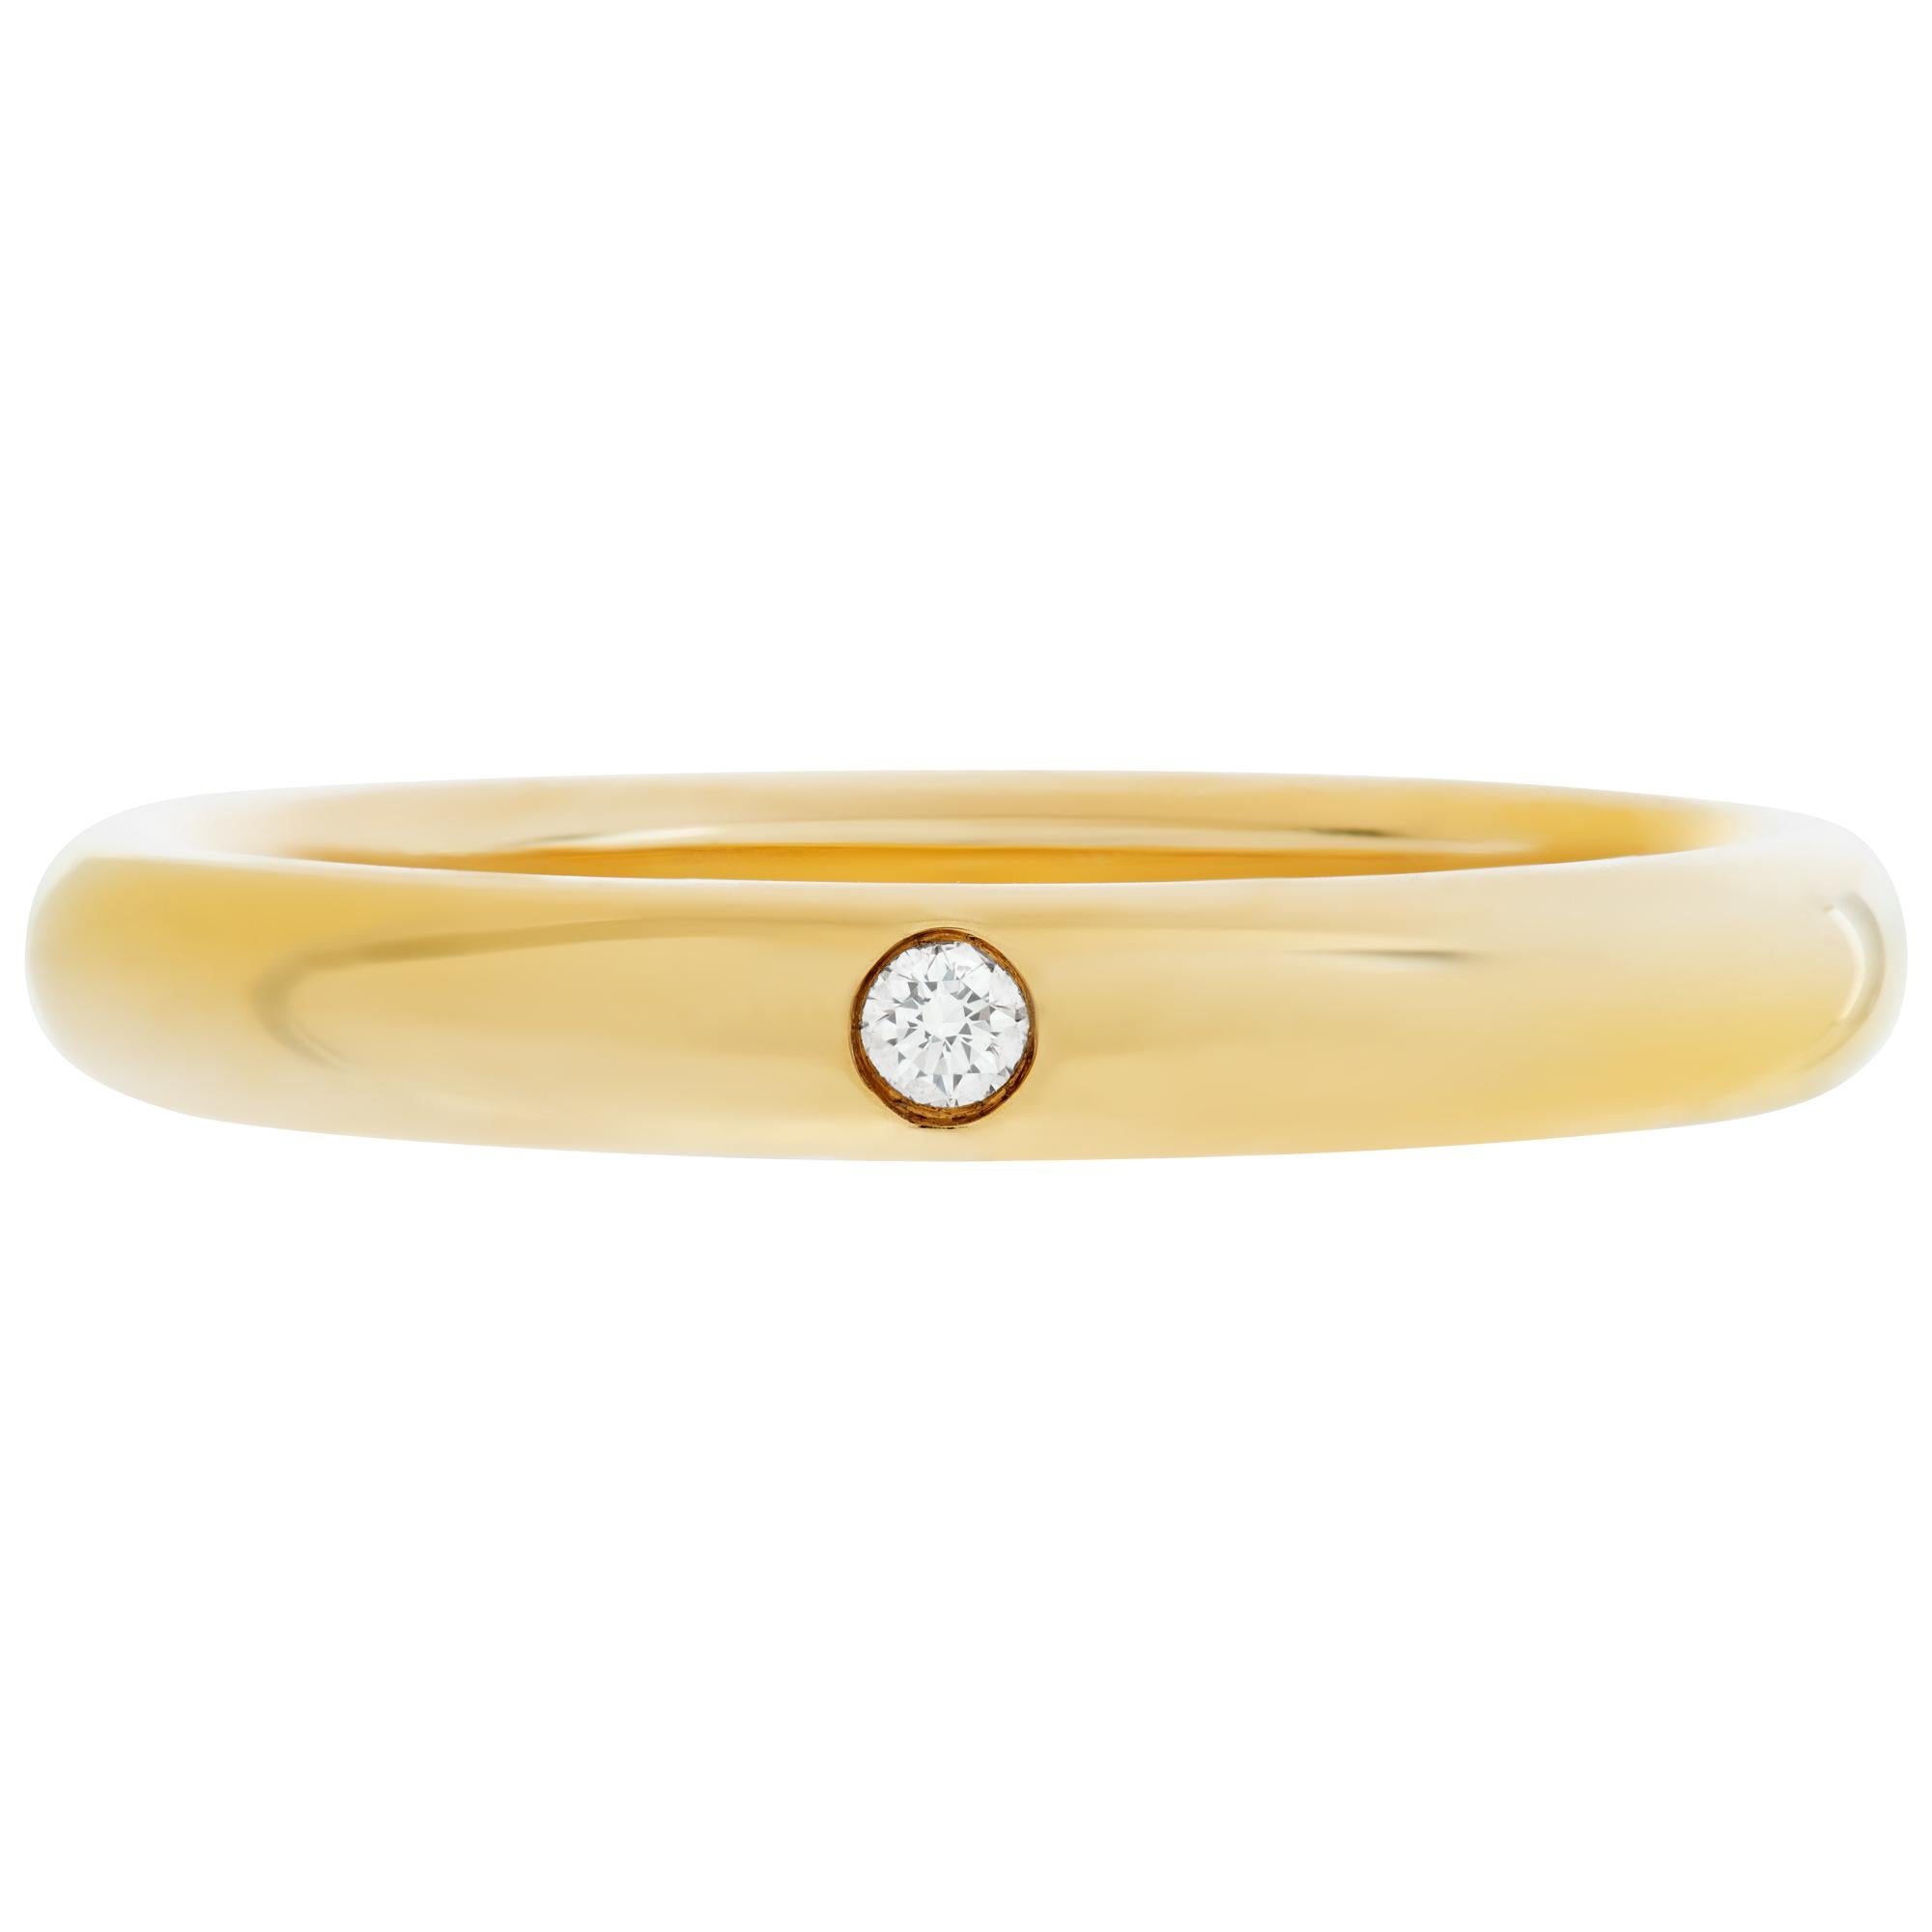 Tiffany & Co. Elsa Peretti band ring in 18k yellow gold with 0.02 carat single diamond. 2.8mm width. Size 6.This Tiffany & Co. ring is currently size 6 and some items can be sized up or down, please ask! It weighs 5.6 pennyweights and is 18k.